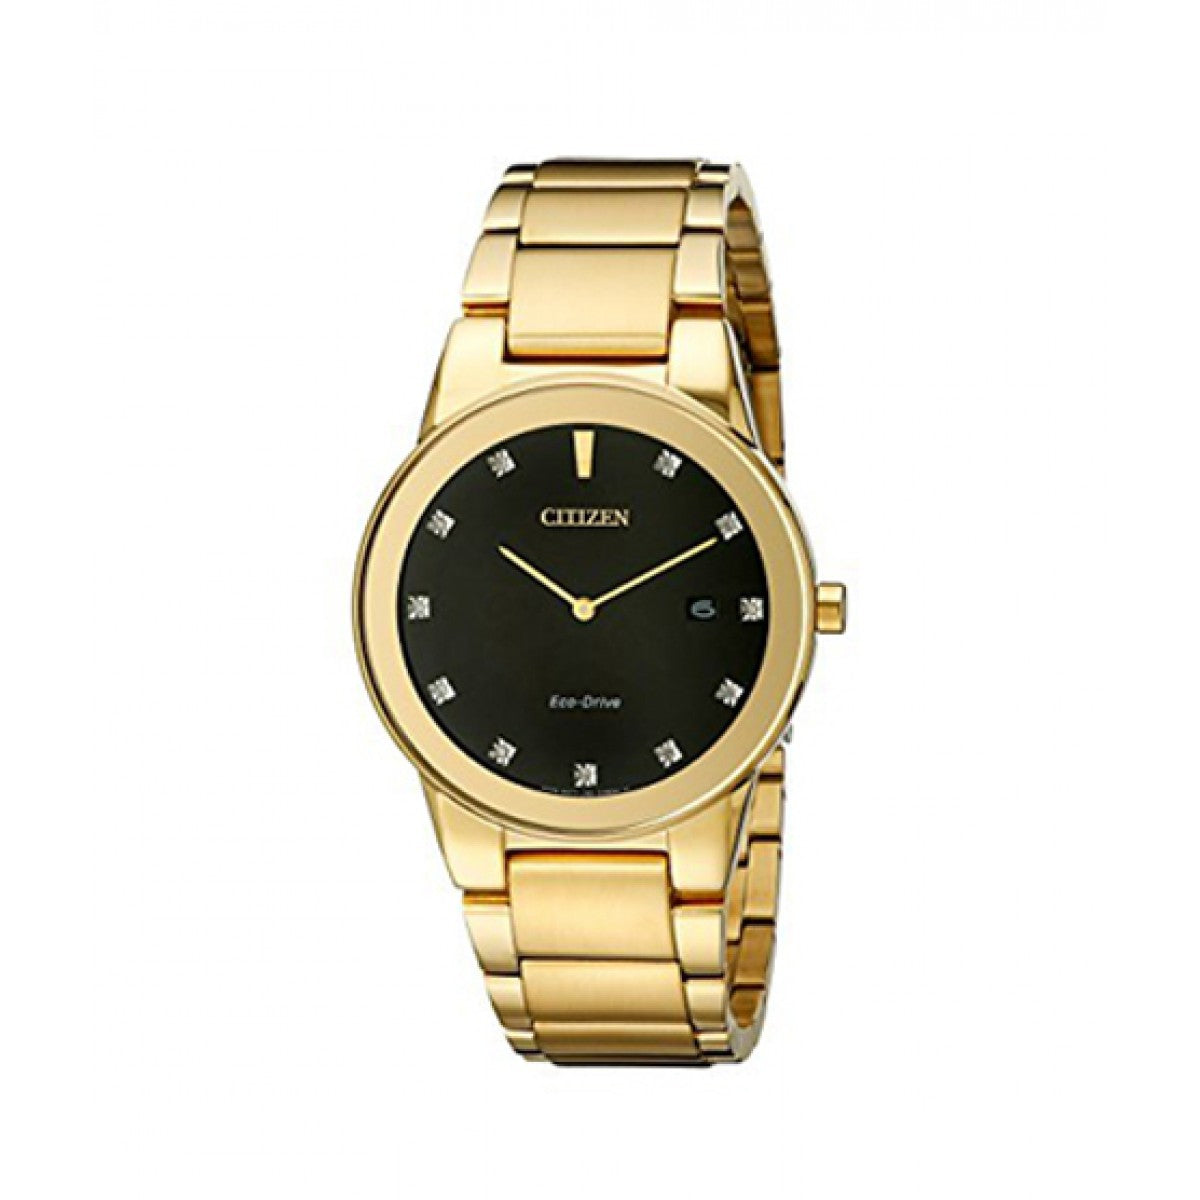 Citizen Eco Drive Gold Tone Watch with Black Dial